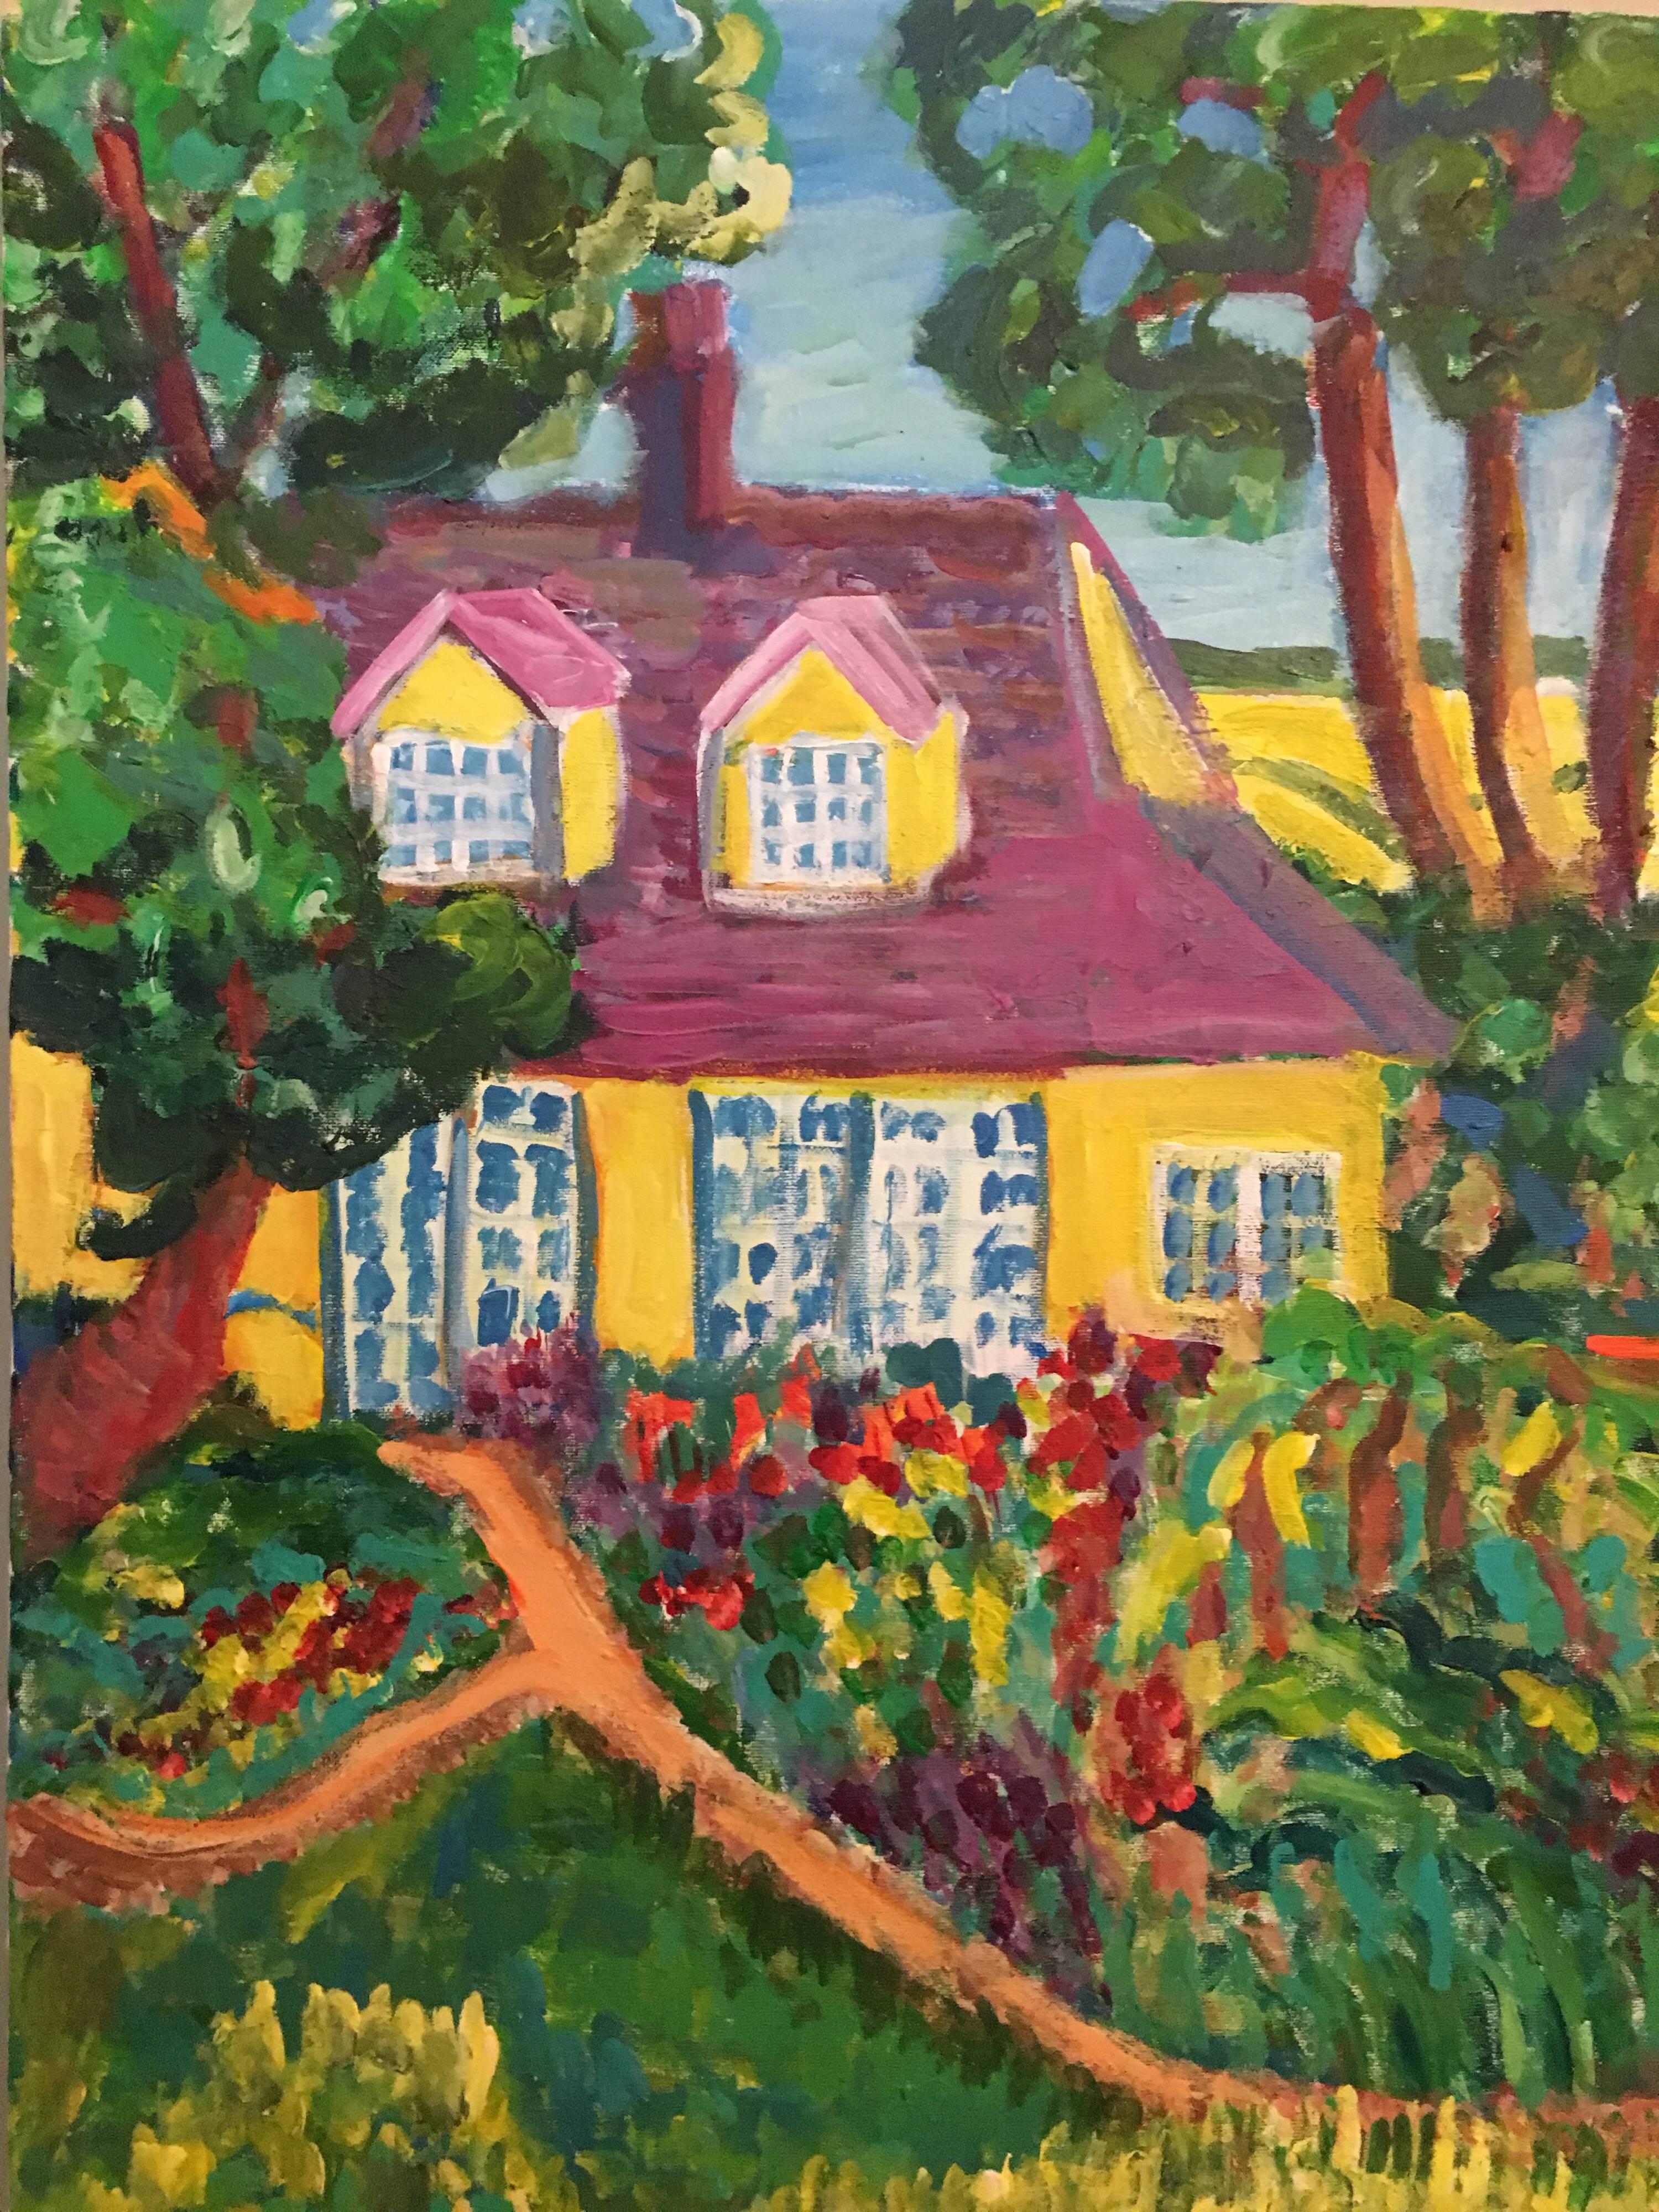 Yellow Cottage, Landscape, British Artist - Impressionist Painting by Pamela Cawley